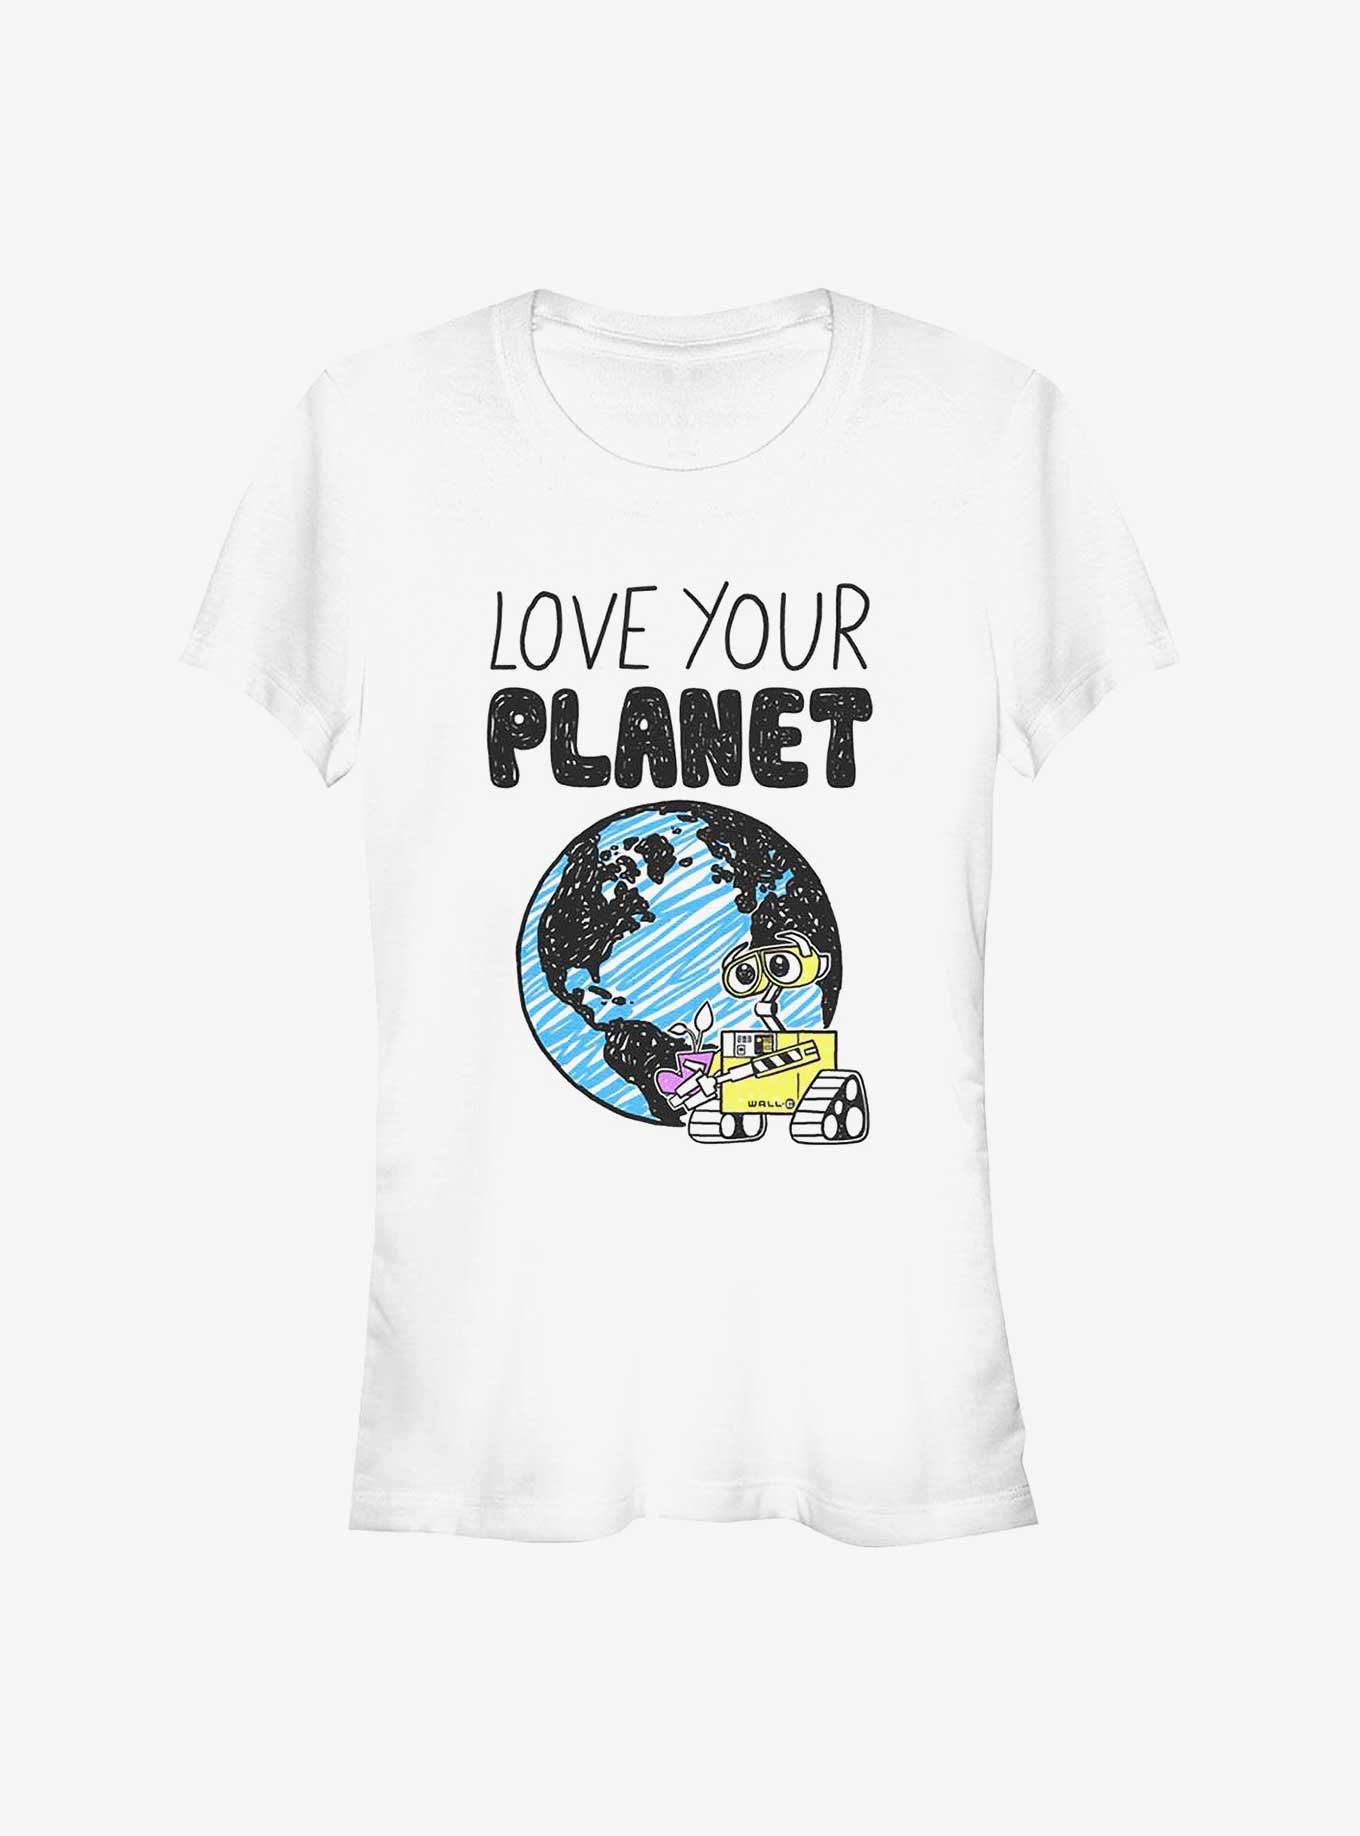 Disney Pixar Wall-E Earth Day Love Your Planet Girls T-Shirt, WHITE, hi-res